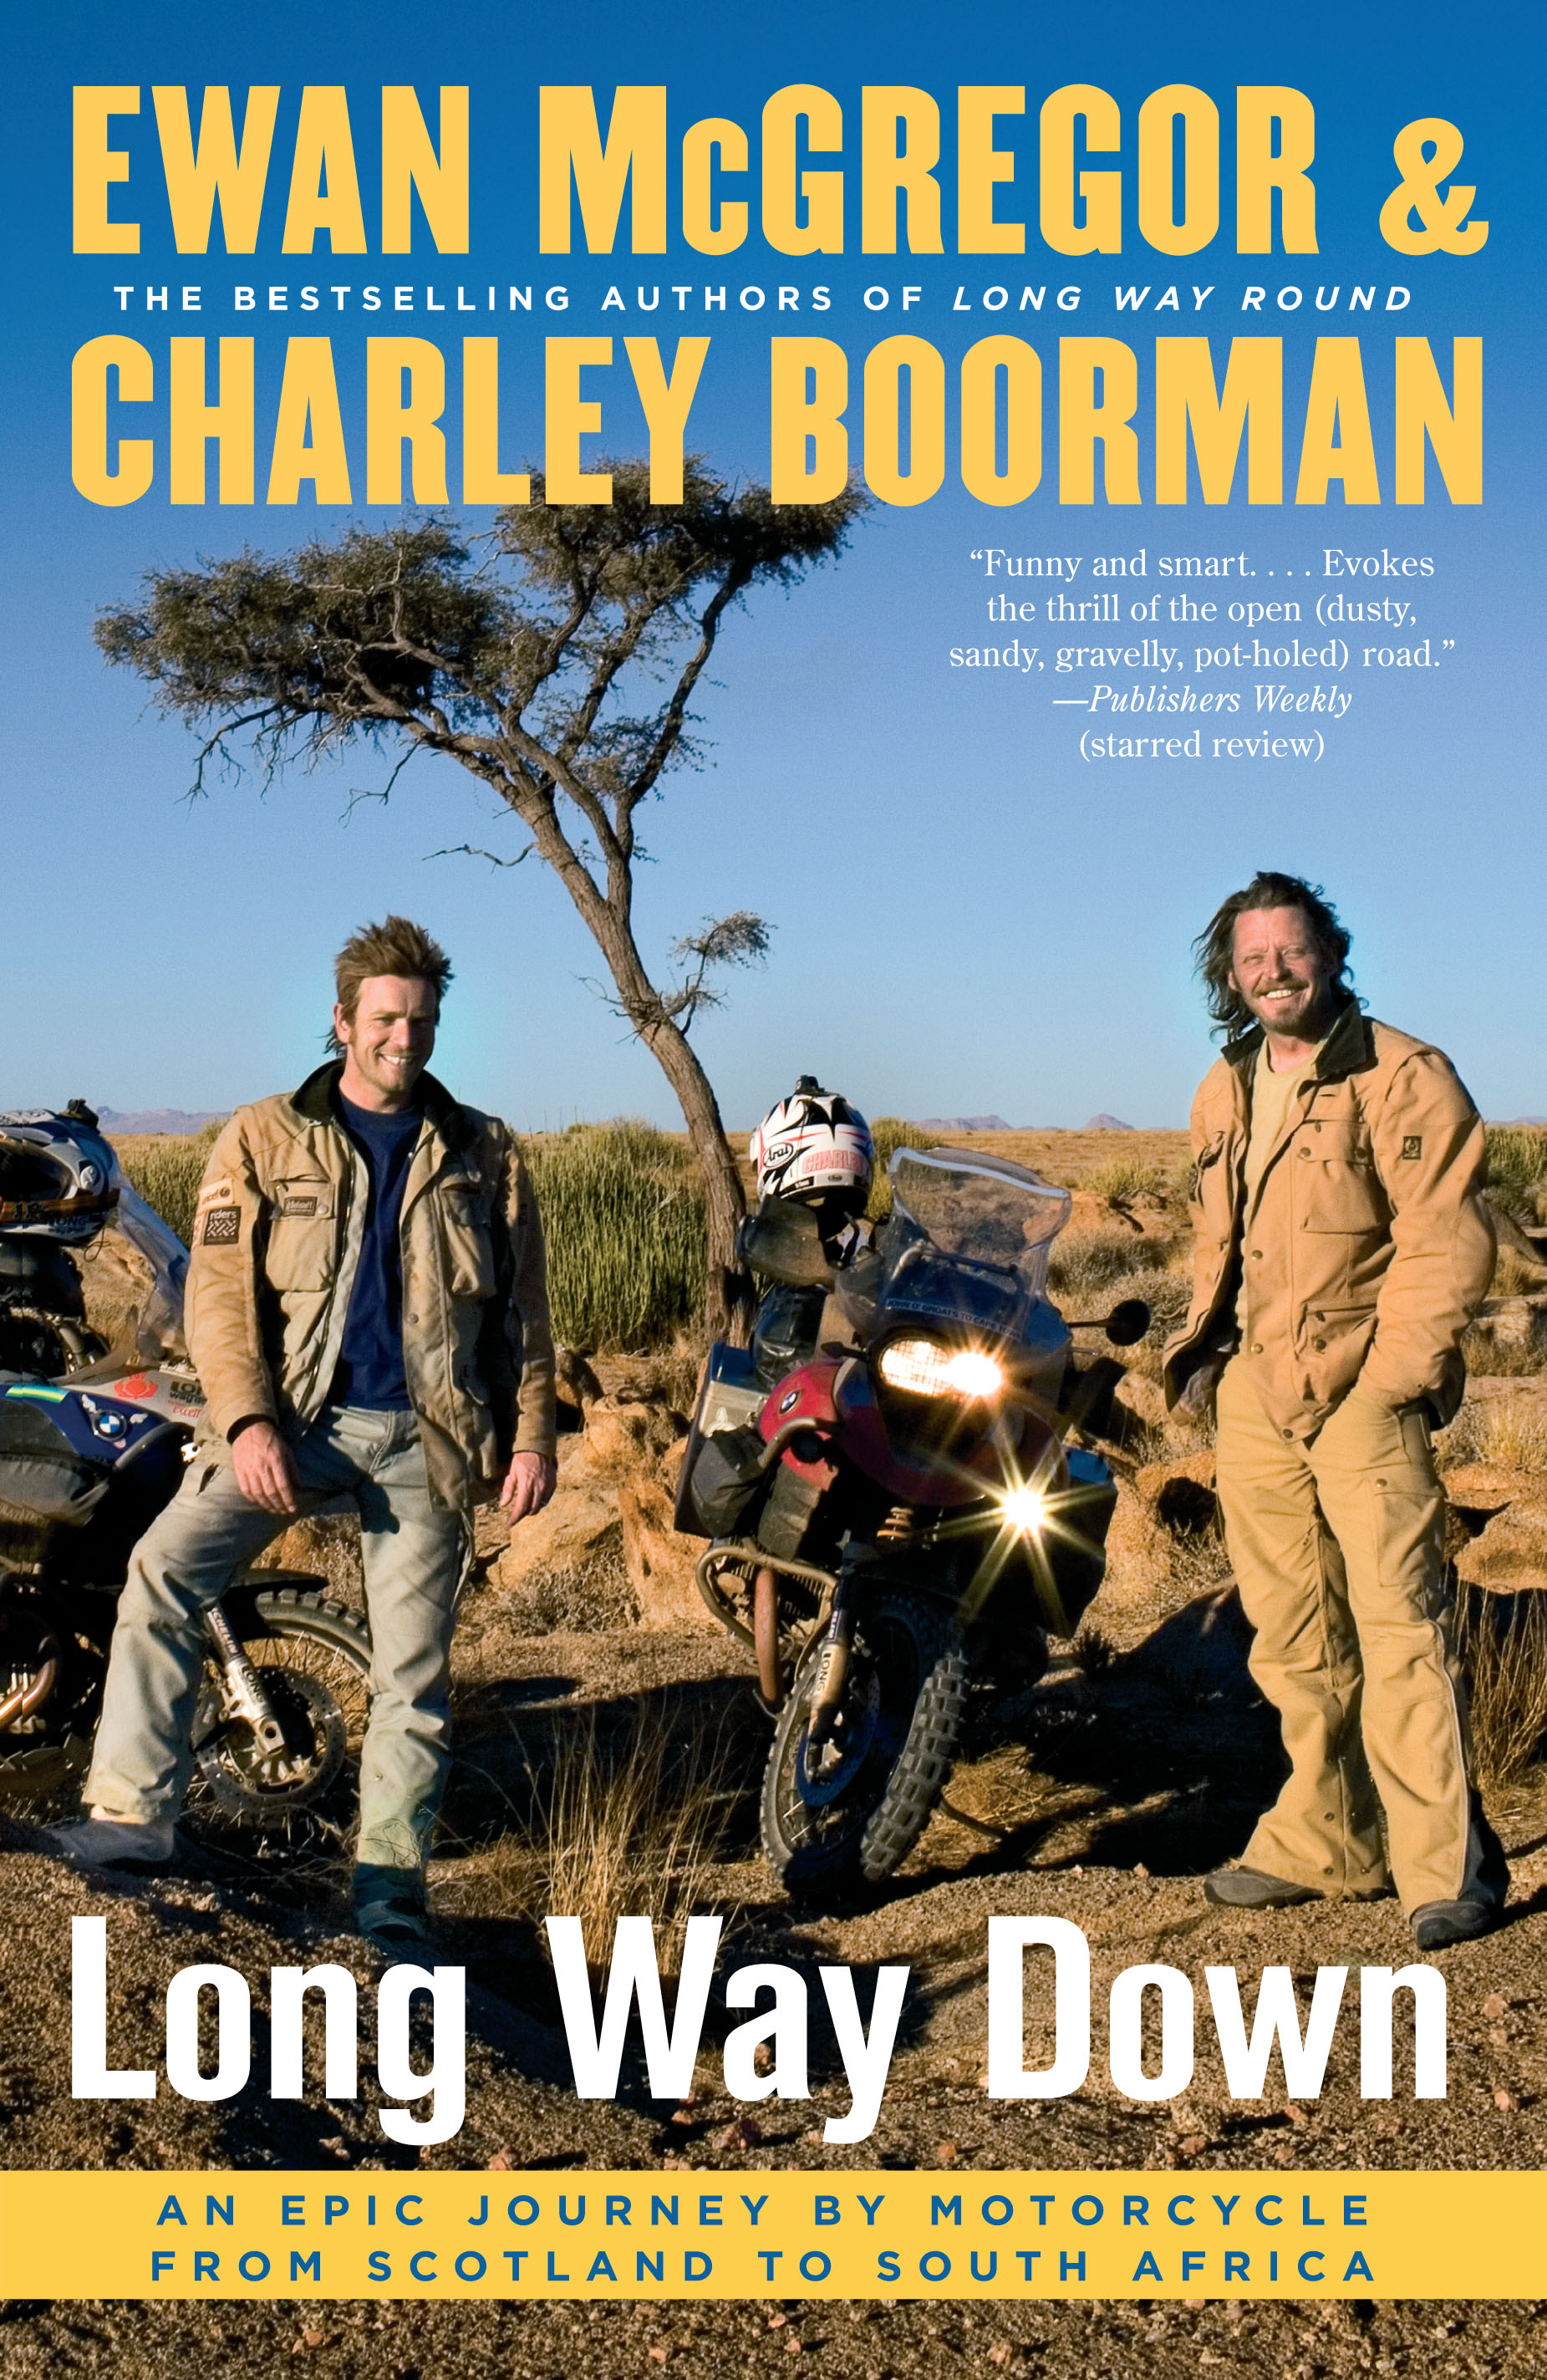 Long Way Down | Book by Ewan McGregor, Charley Boorman | Official ...